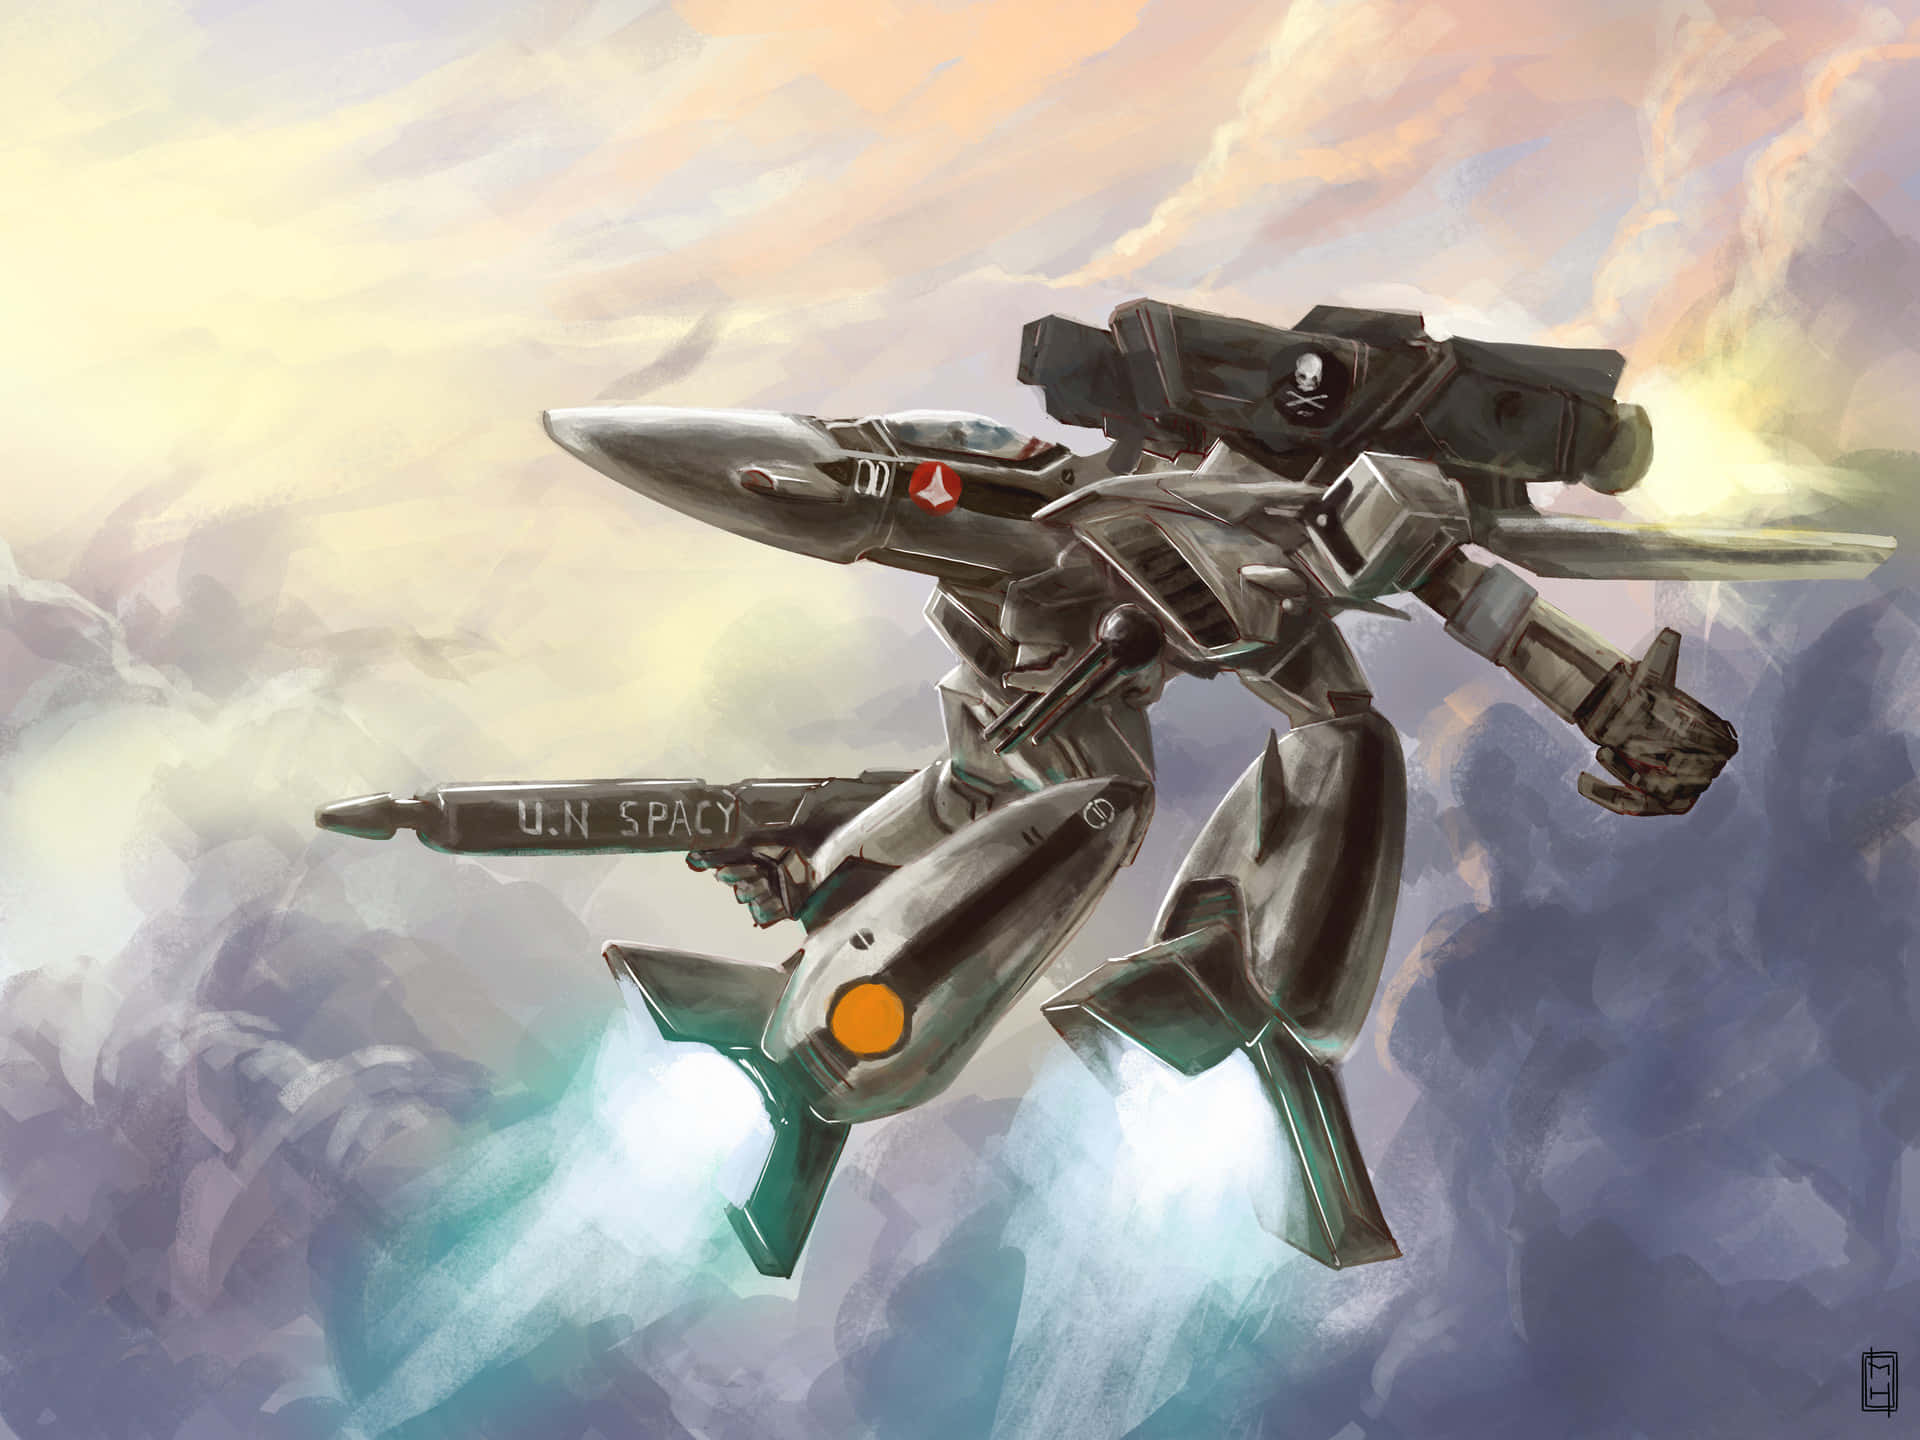 Join the resistance and protect Earth from the Robotech armada. Wallpaper